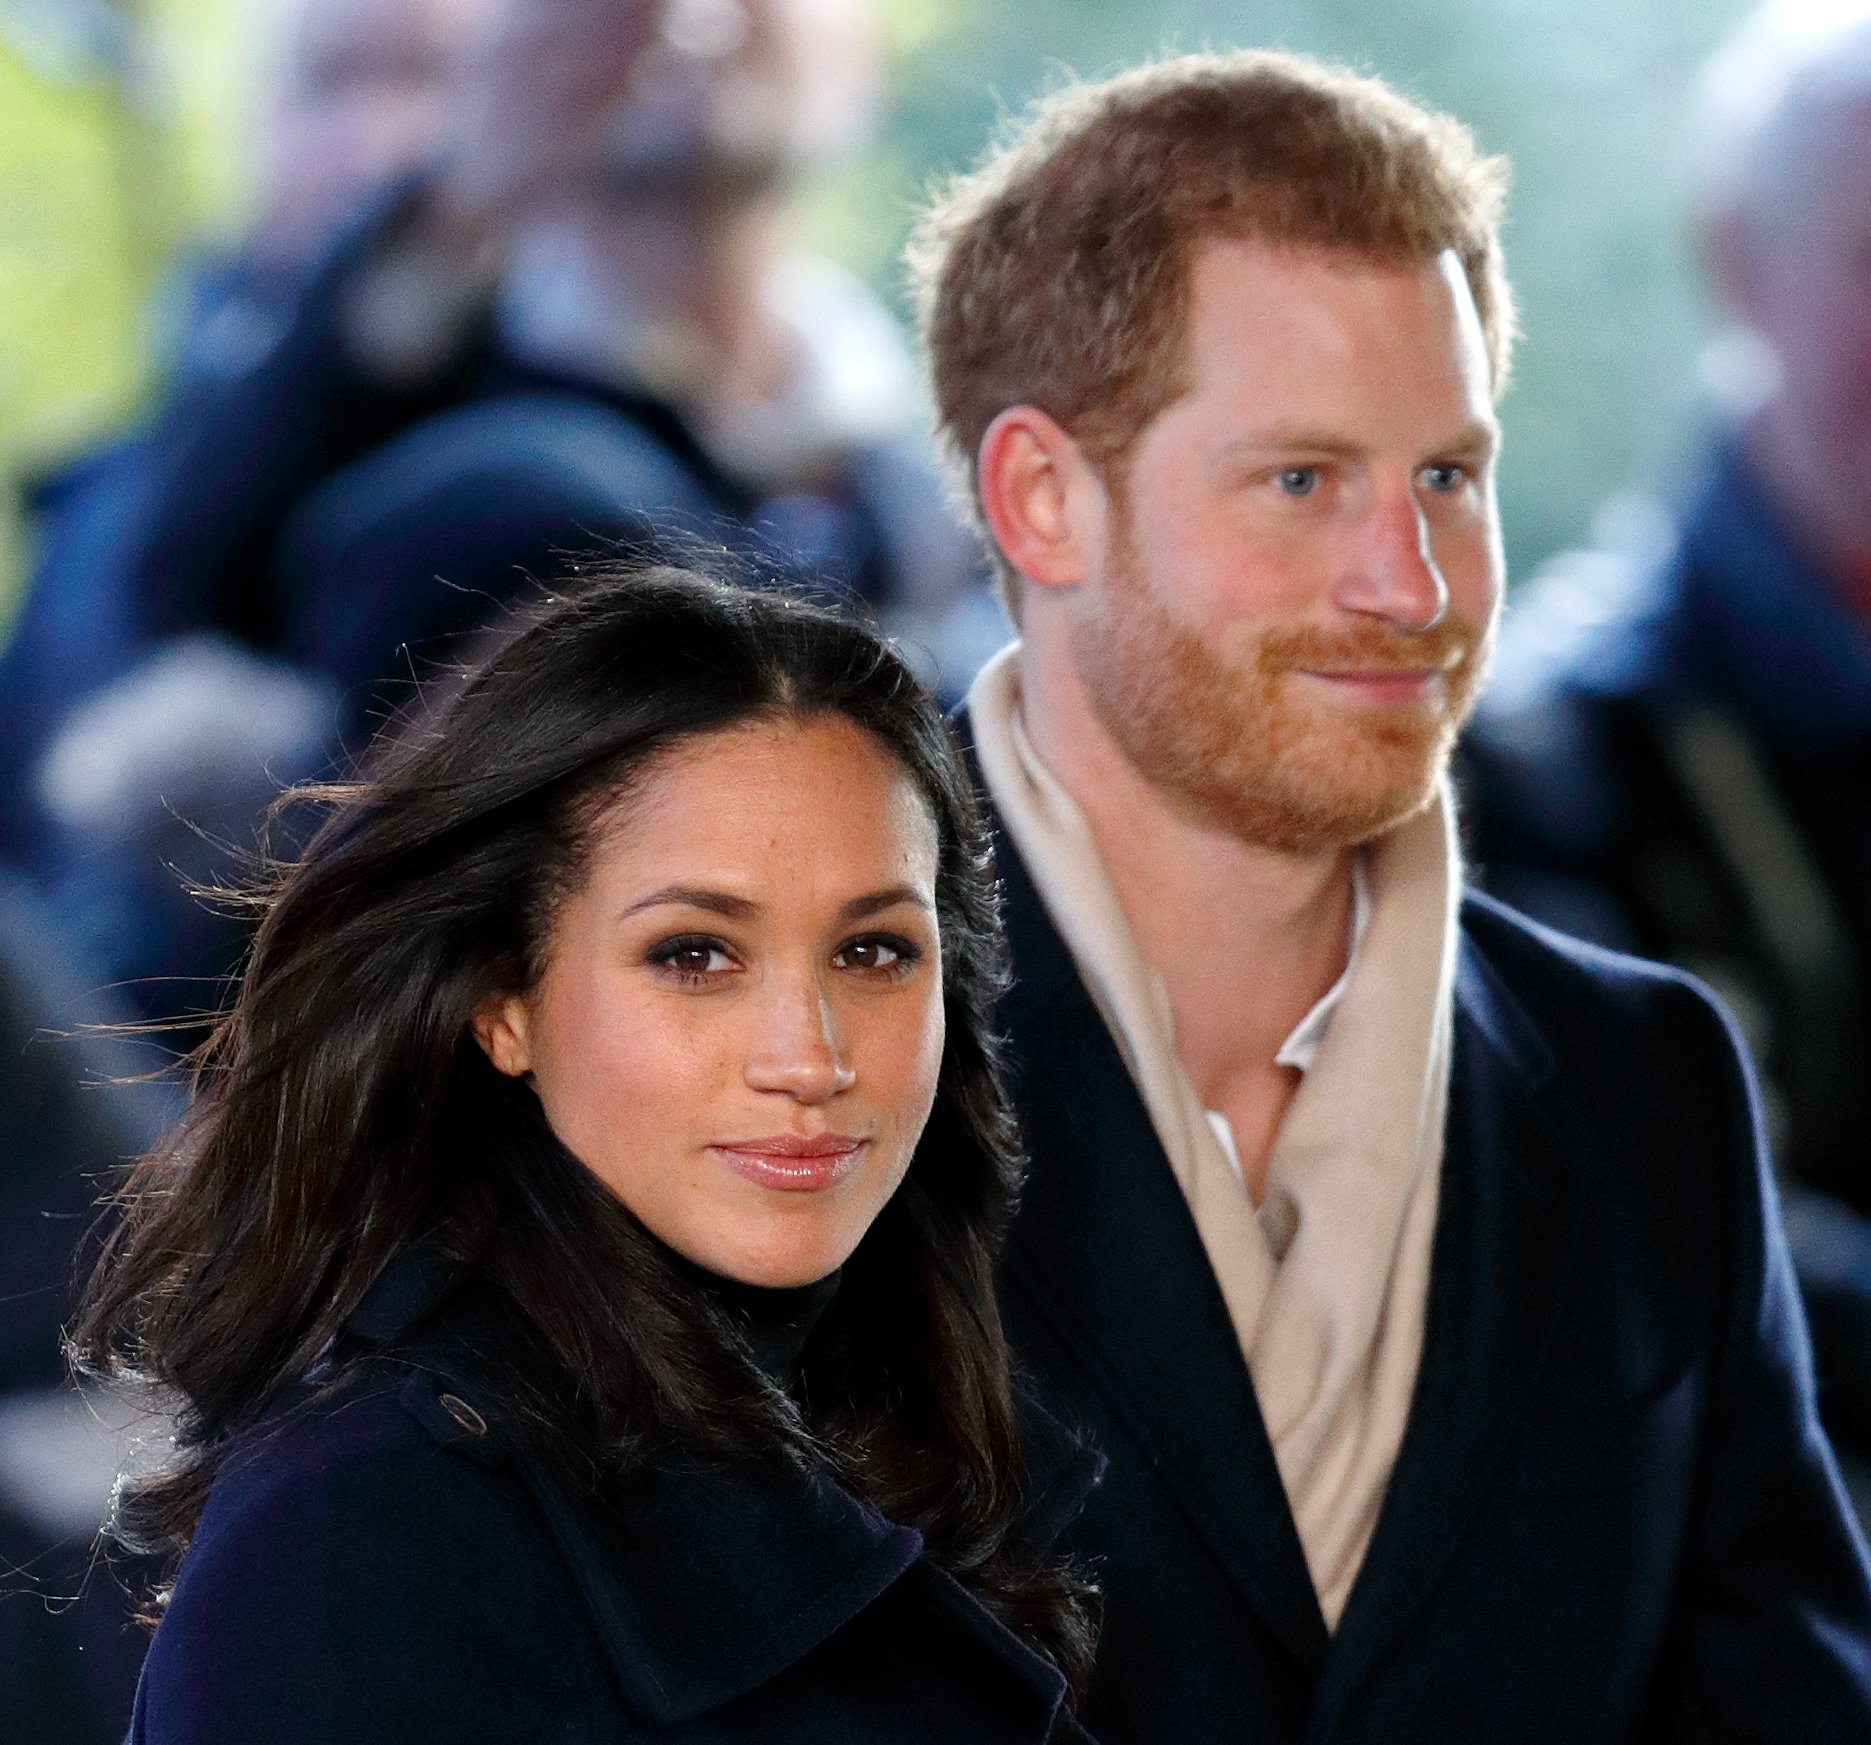 The Duke and Duchess of Sussex are expecting their first child in April. | Photo: Getty Images